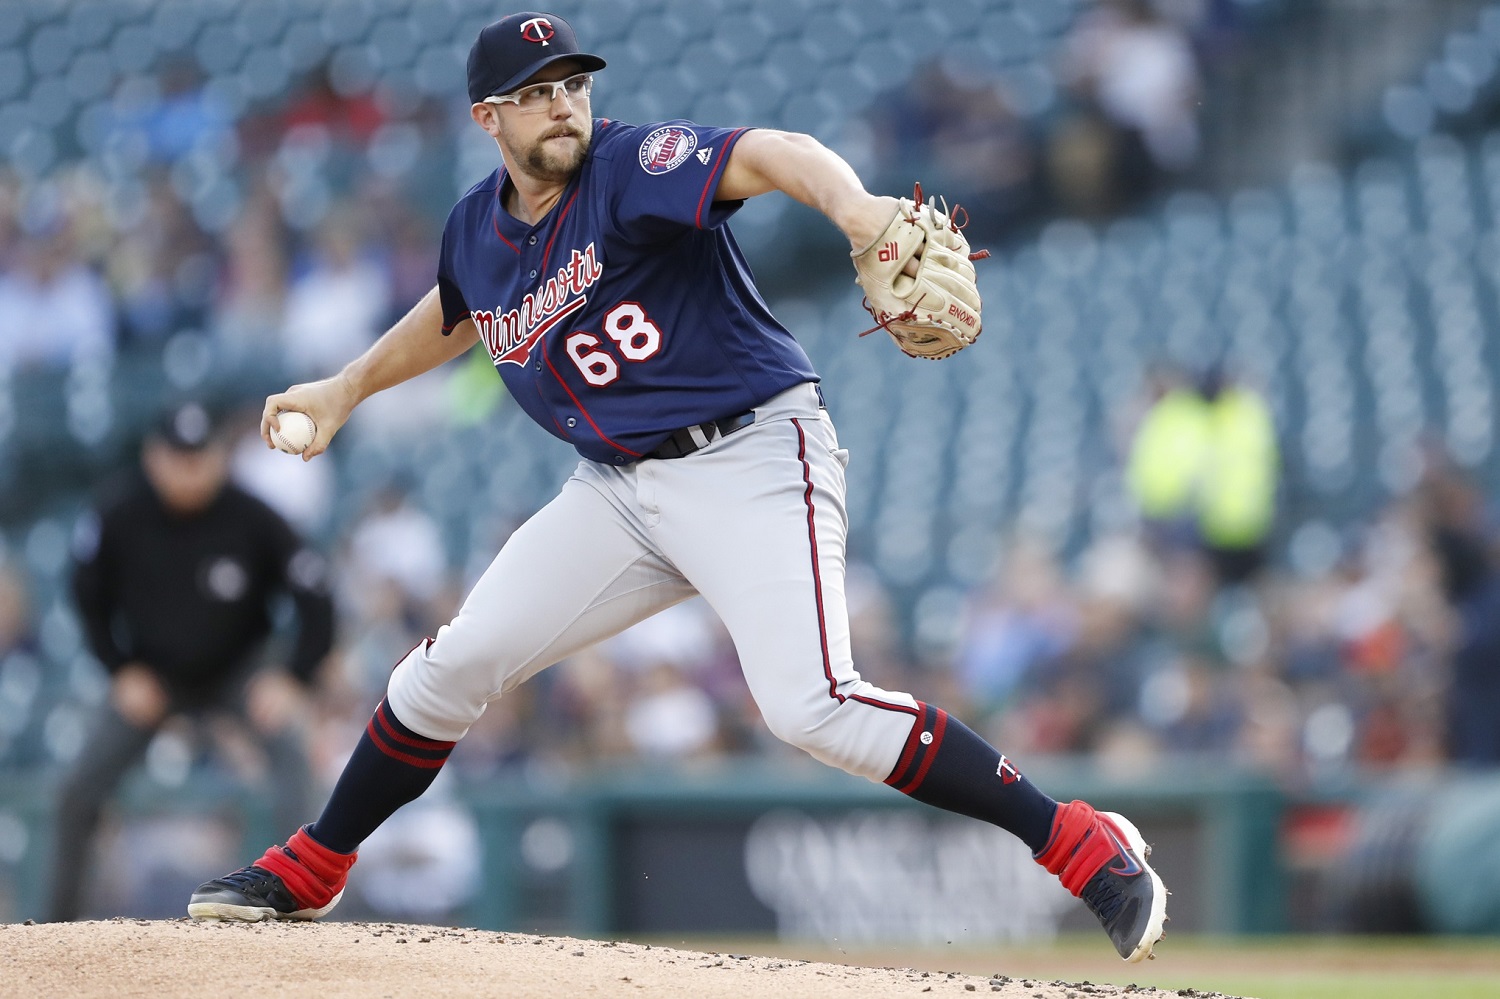 Brian Dozier for Jose de Leon Makes Sense for both the Dodgers and